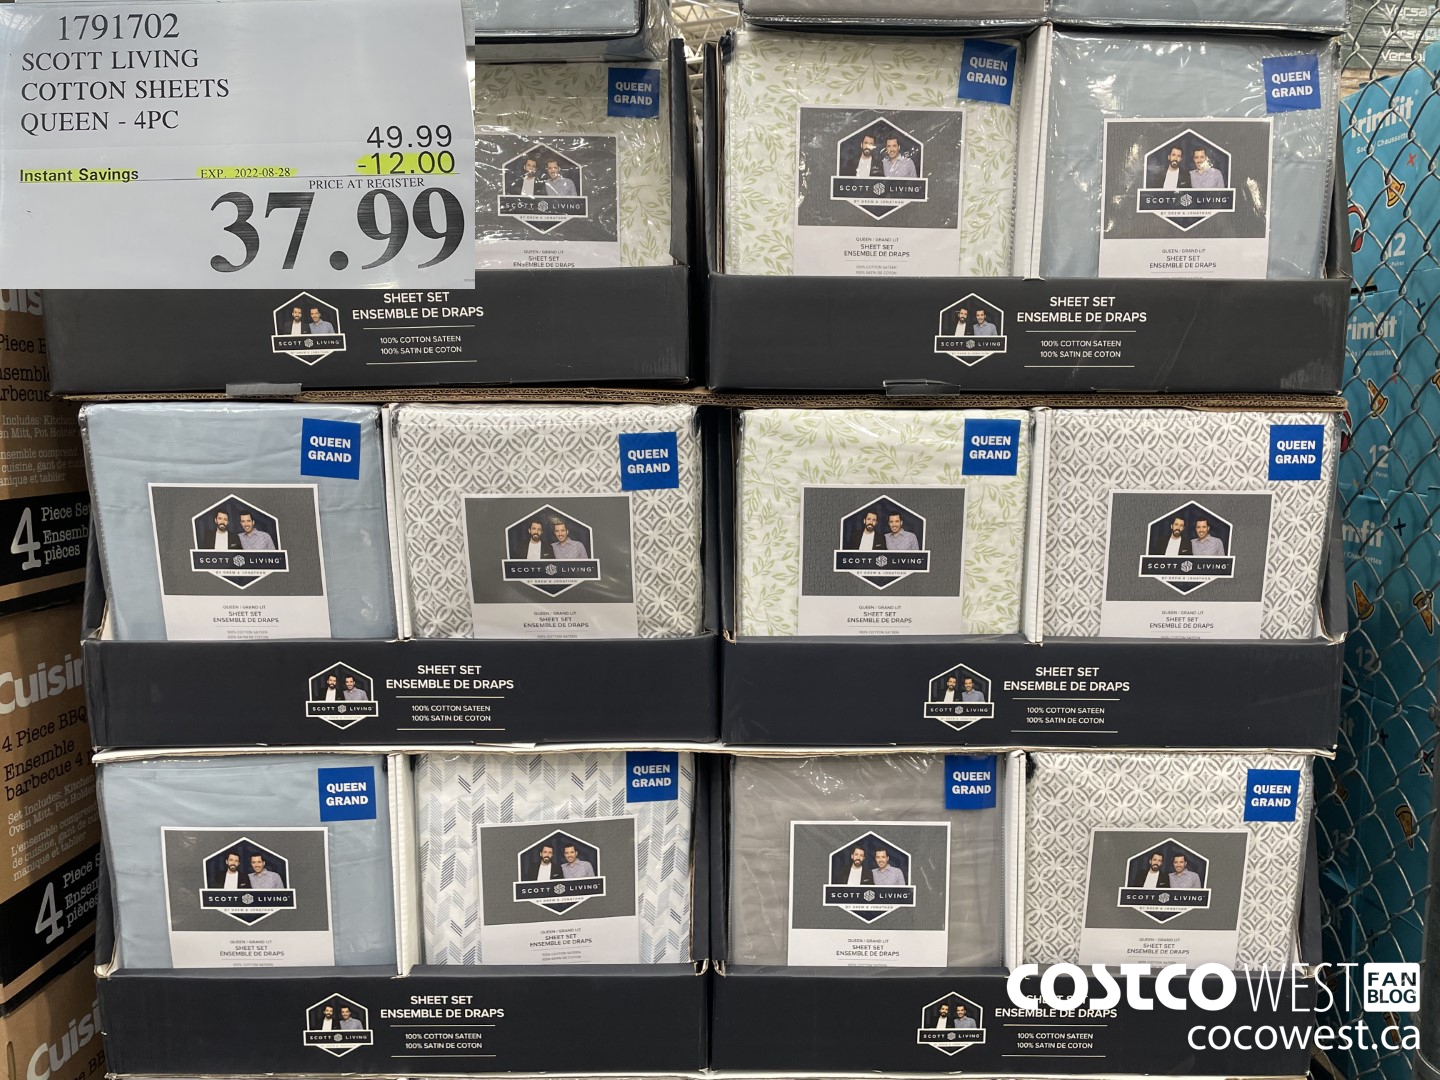 Costco Flyer & Costco Sale Items for Aug 22-28, 2022 for BC, AB, MB, SK -  Costco West Fan Blog